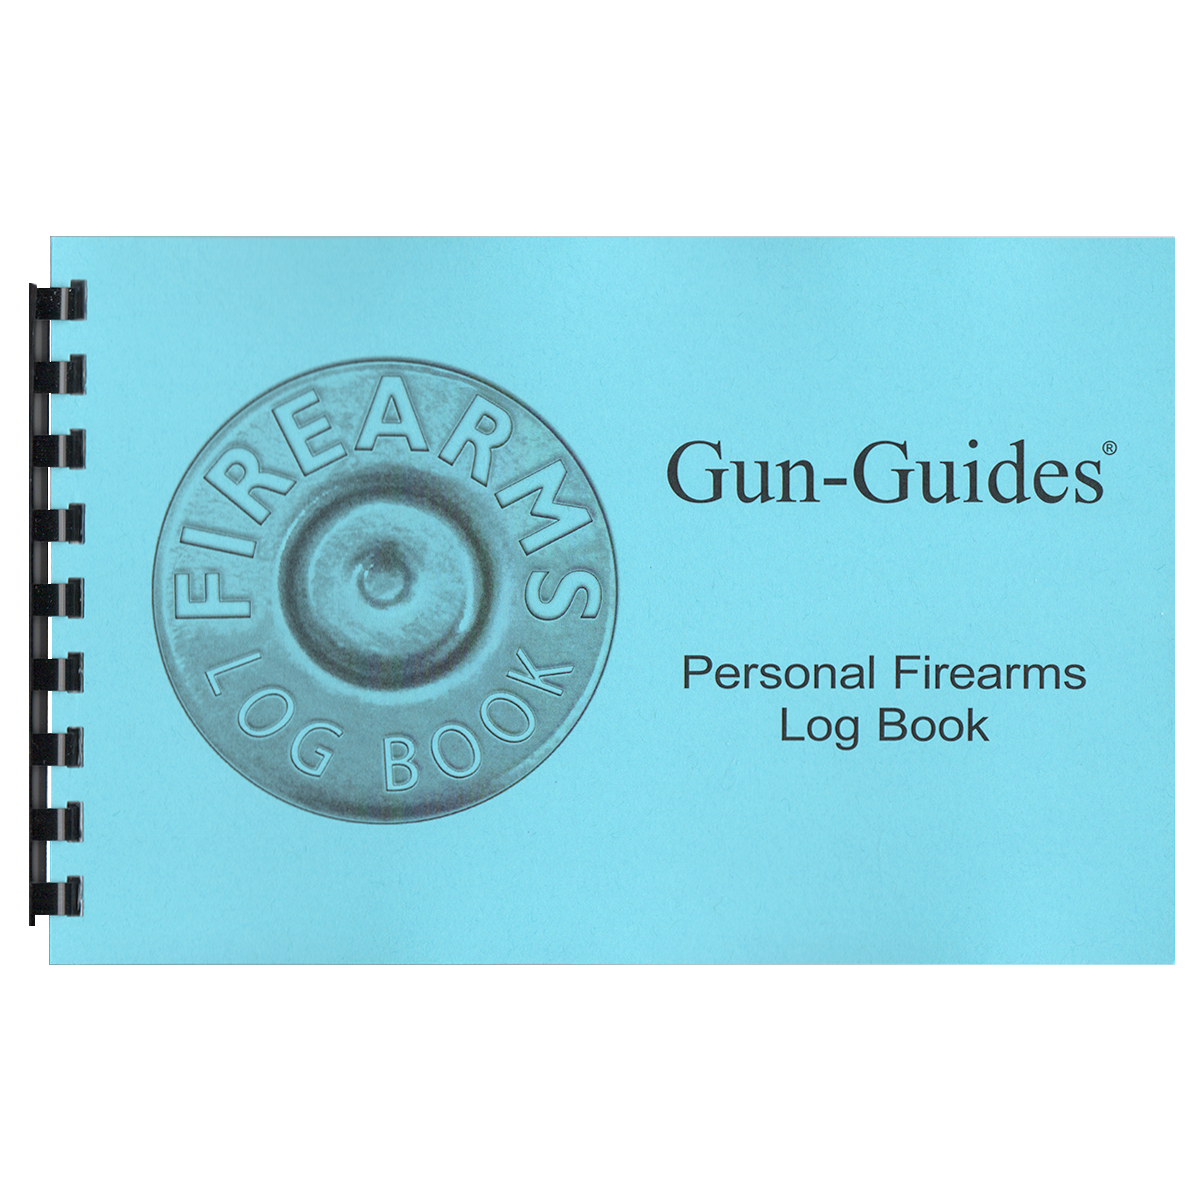 PERSONAL FIREARMS LOG BOOK (3 PACK)